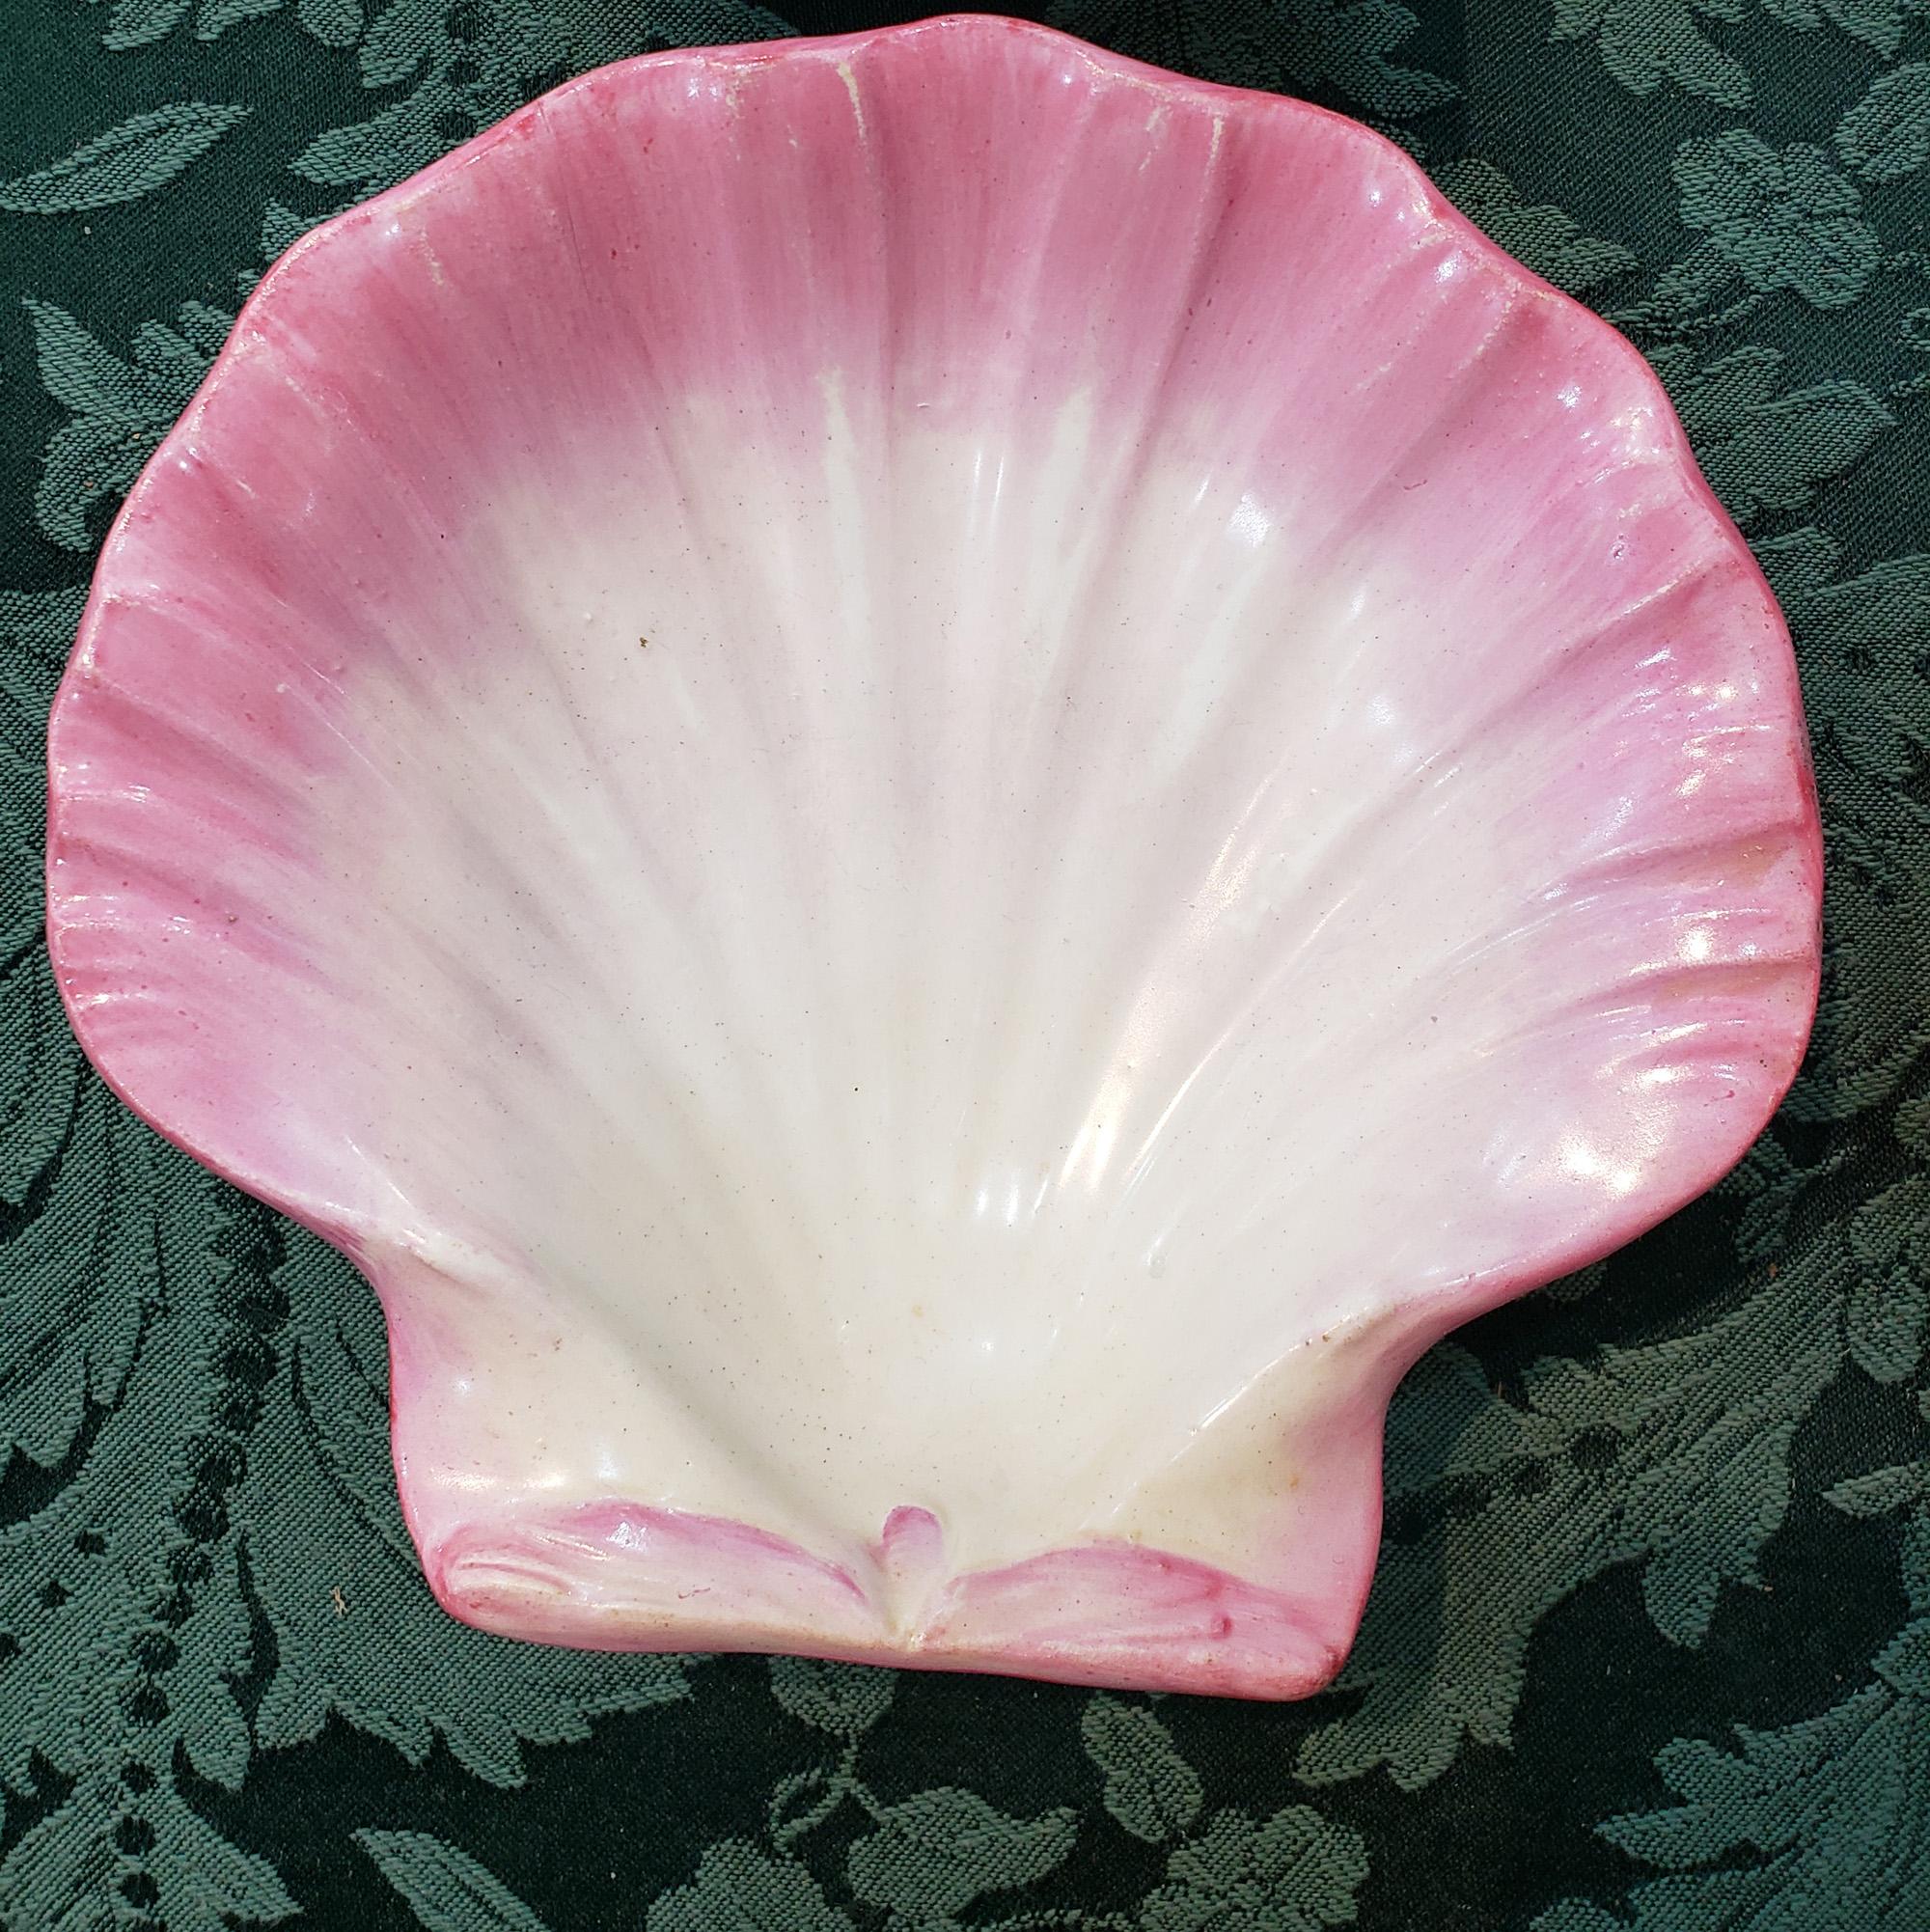 Wedgwood pottery pink scallop shell dishes,
Set of four, 
Pattern no. 7035
Circa 1866-80

The pair of wedgwood pearlware dishes are formed in the shape of a scallop shell in tones of pink and yellow.

Mark: upper case wedgwood; one impressed